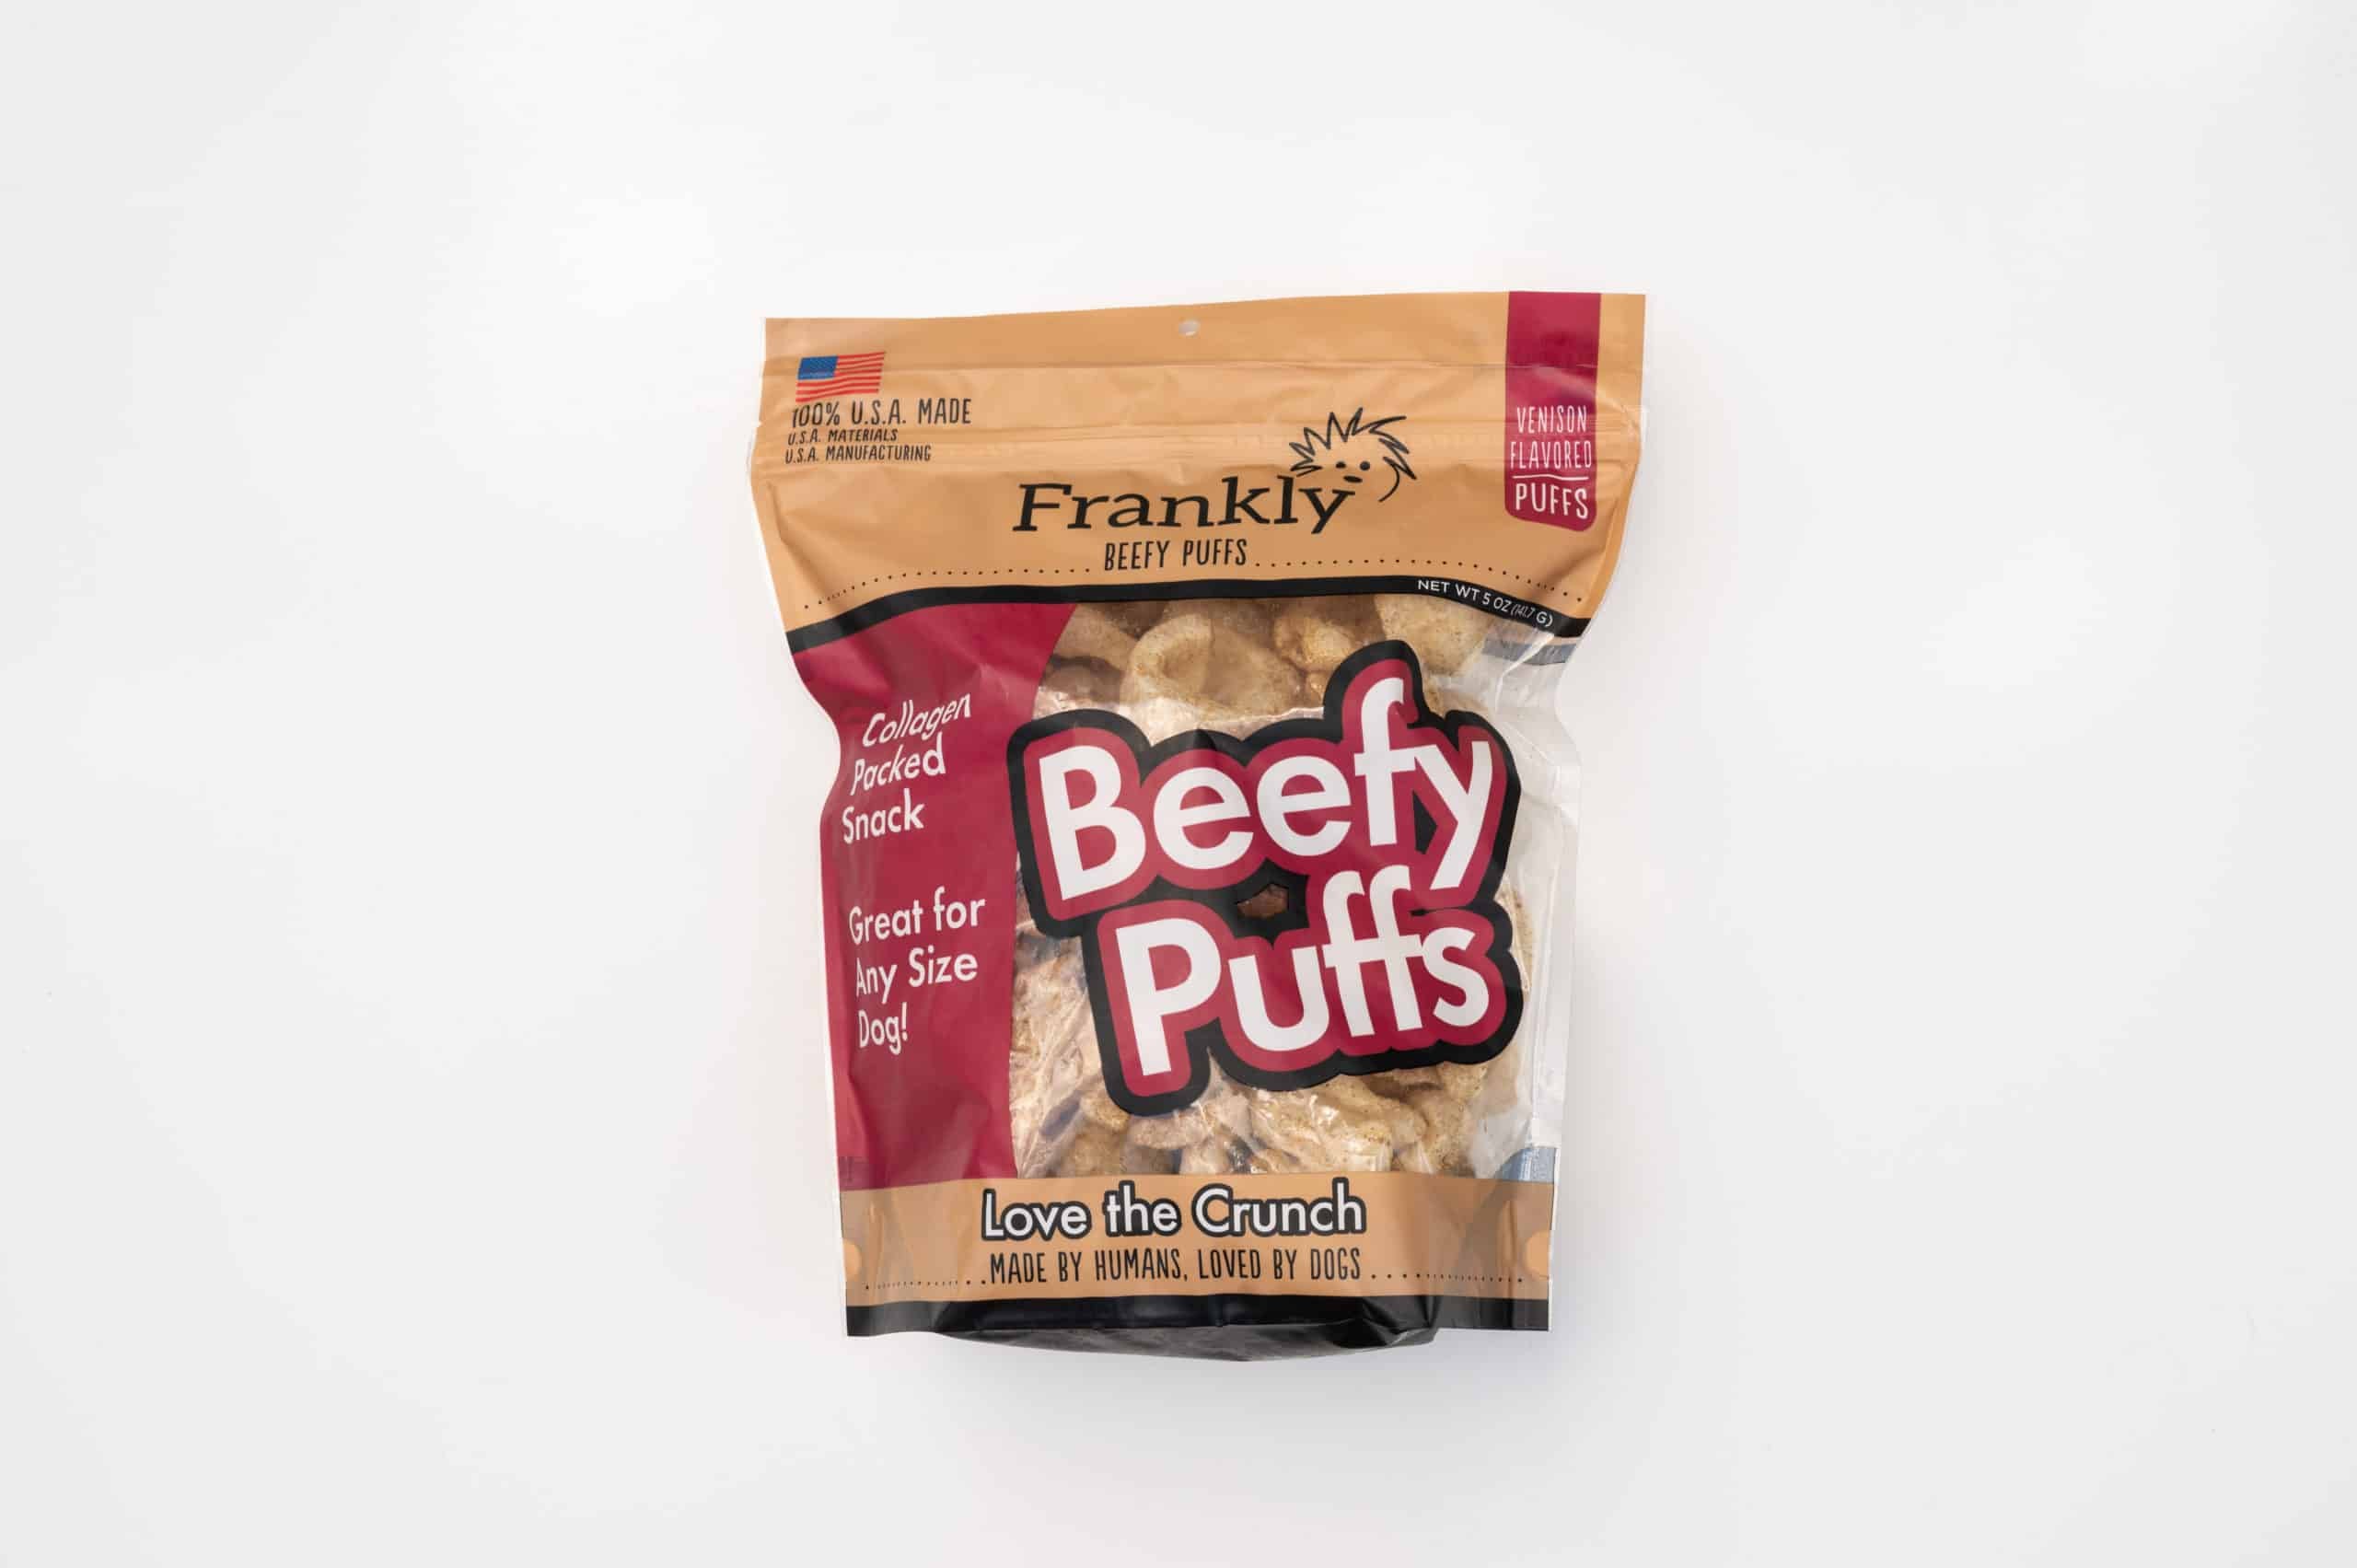 Frankly Beefy Puffs